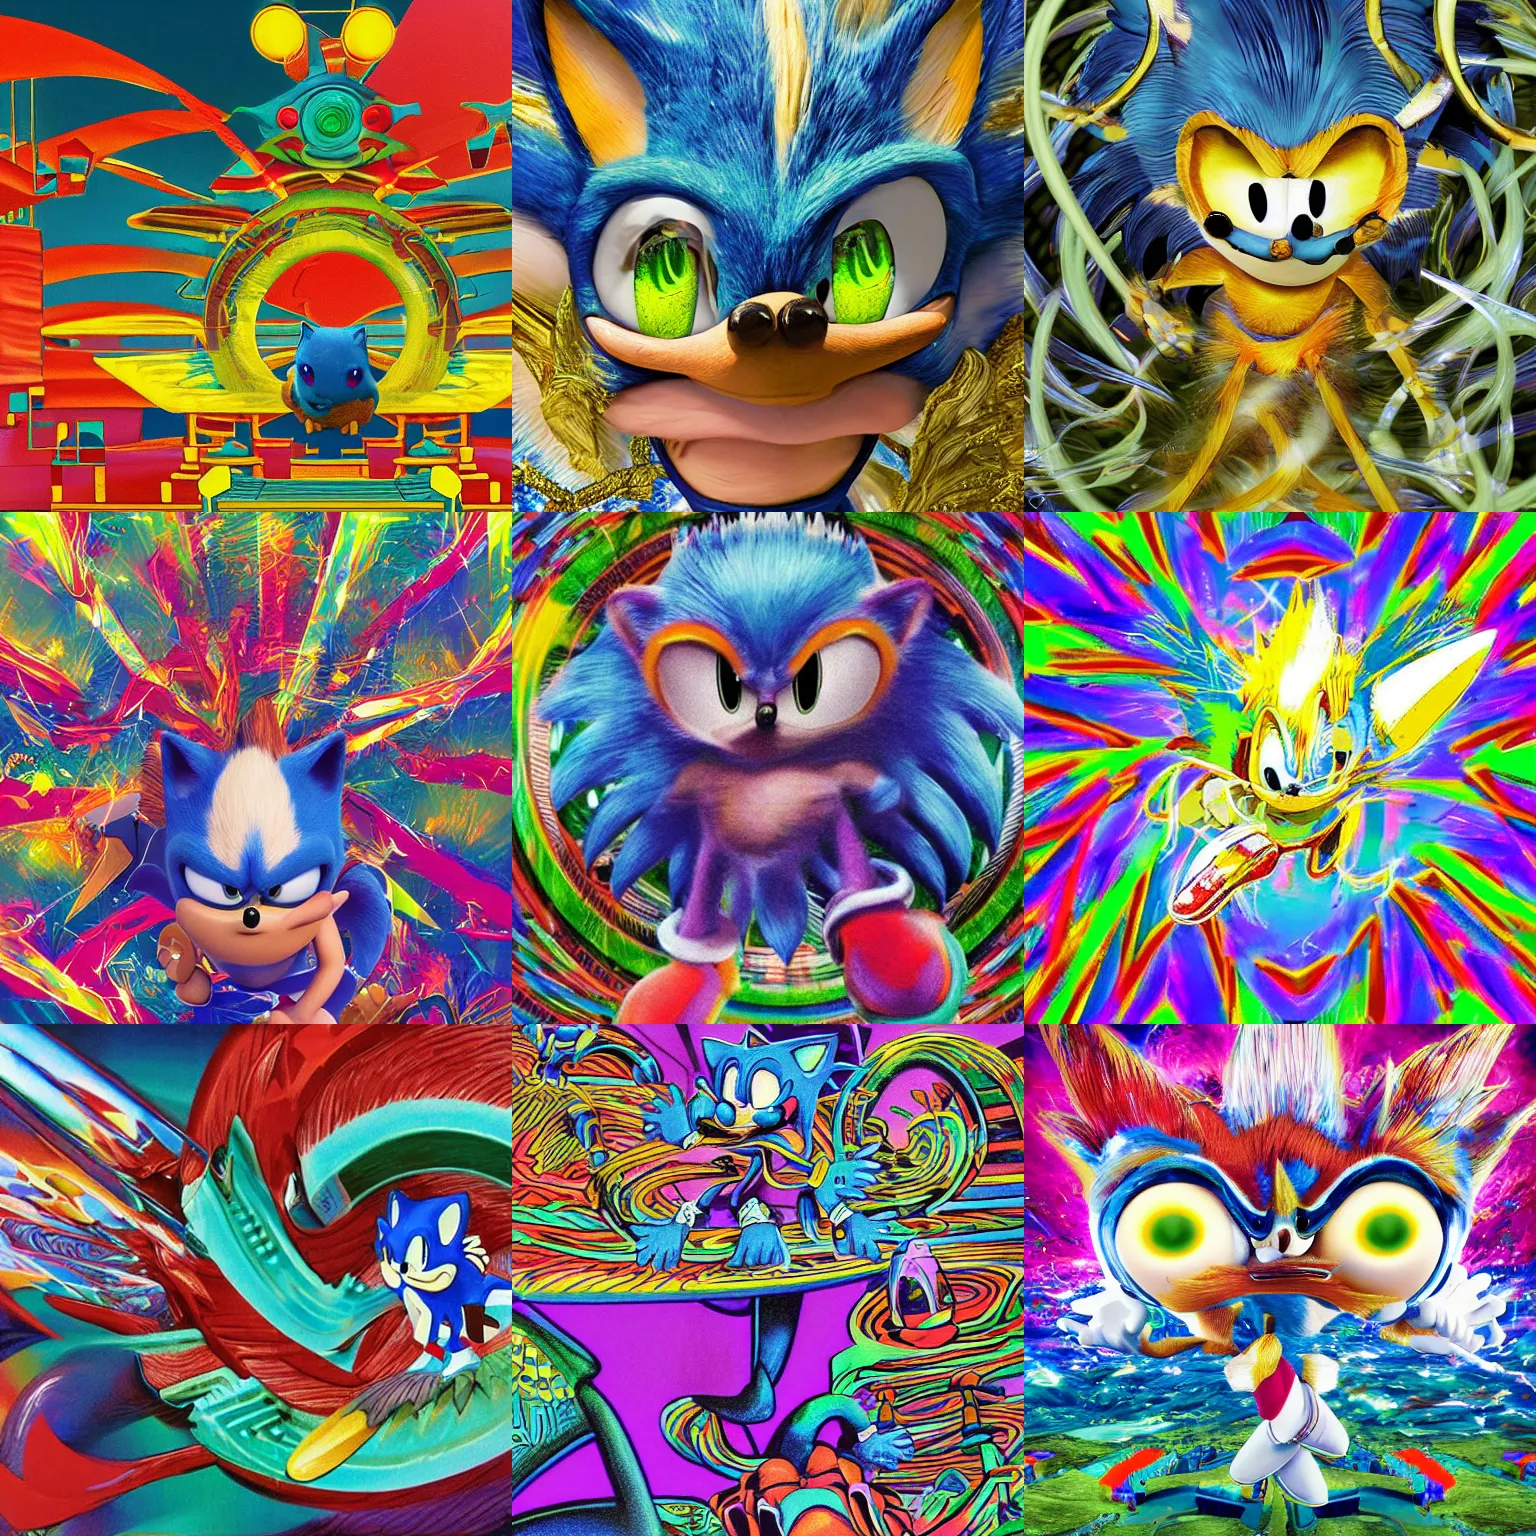 Prompt: close up sonic the hedgehog in a surreal, elastic, chrome ornate, professional, high quality airbrush art mgmt tame impala shpongle album cover of a chrome dissolving LSD DMT blue sonic the hedgehog surfing through vaporwave caves, checkerboard horizon , 1980s 1982 Sega Genesis video game album cover